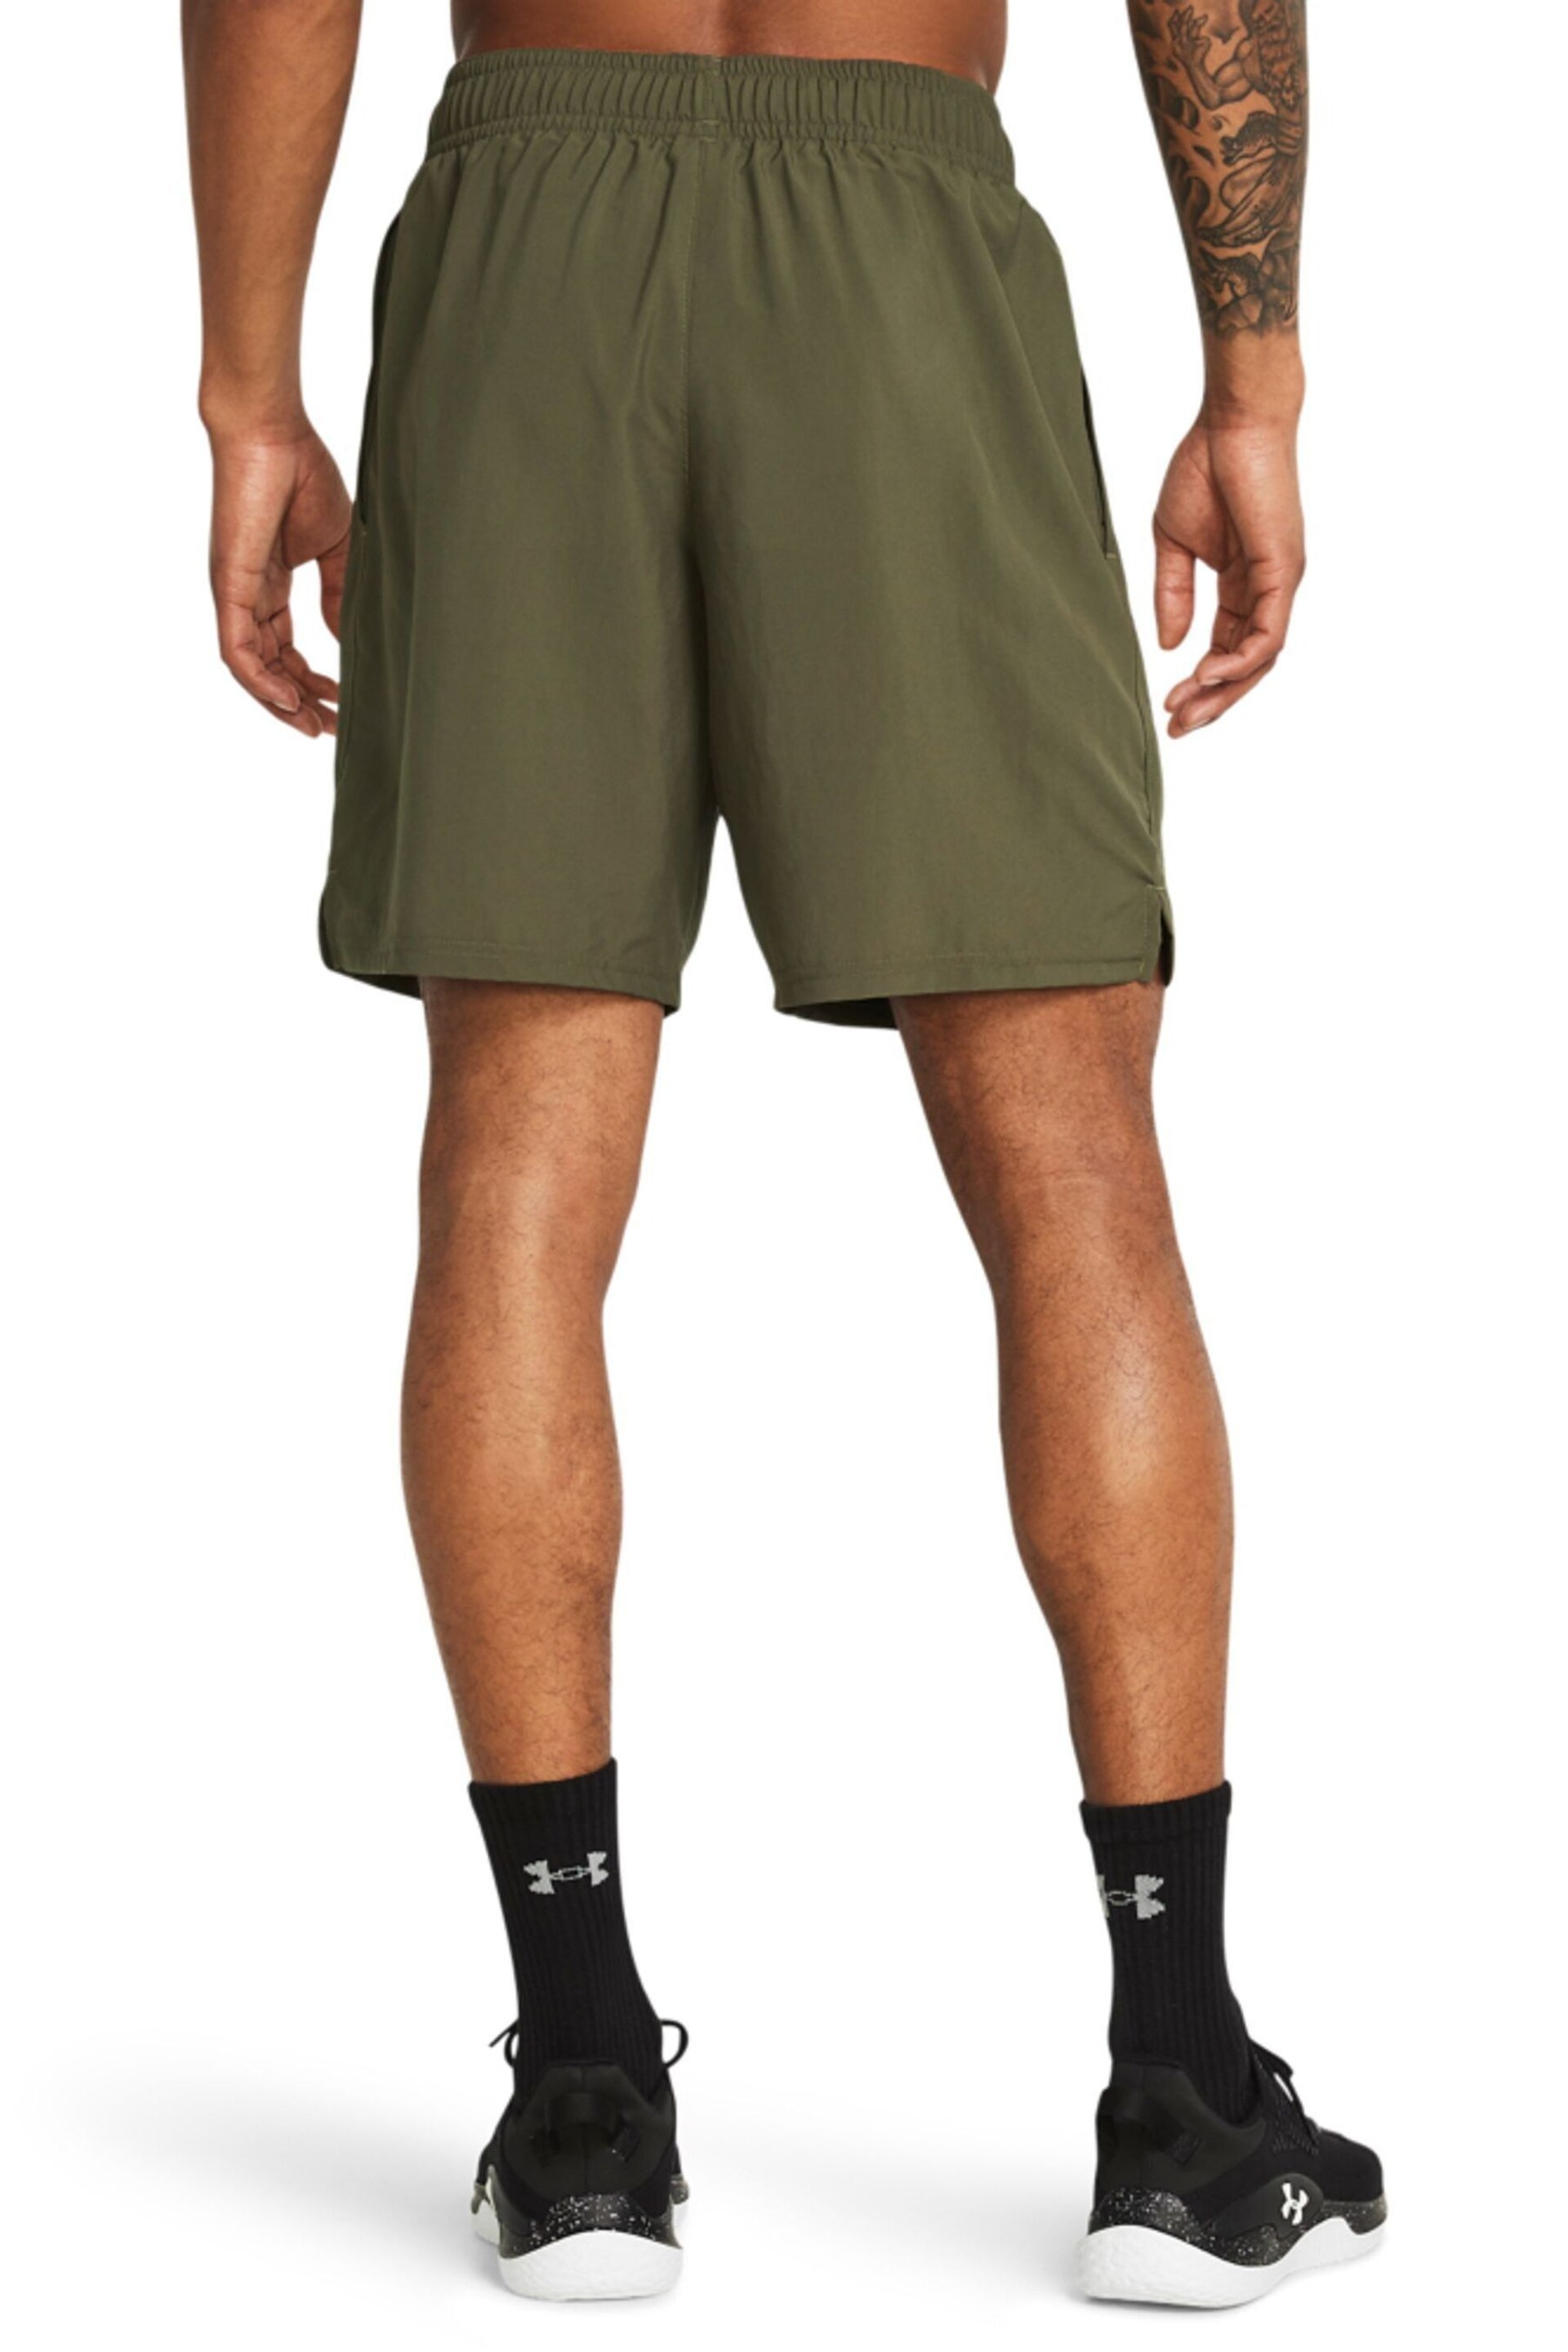 Under Armour Green Under Armour Green Woven Wordmark Shorts - Image 2 of 4